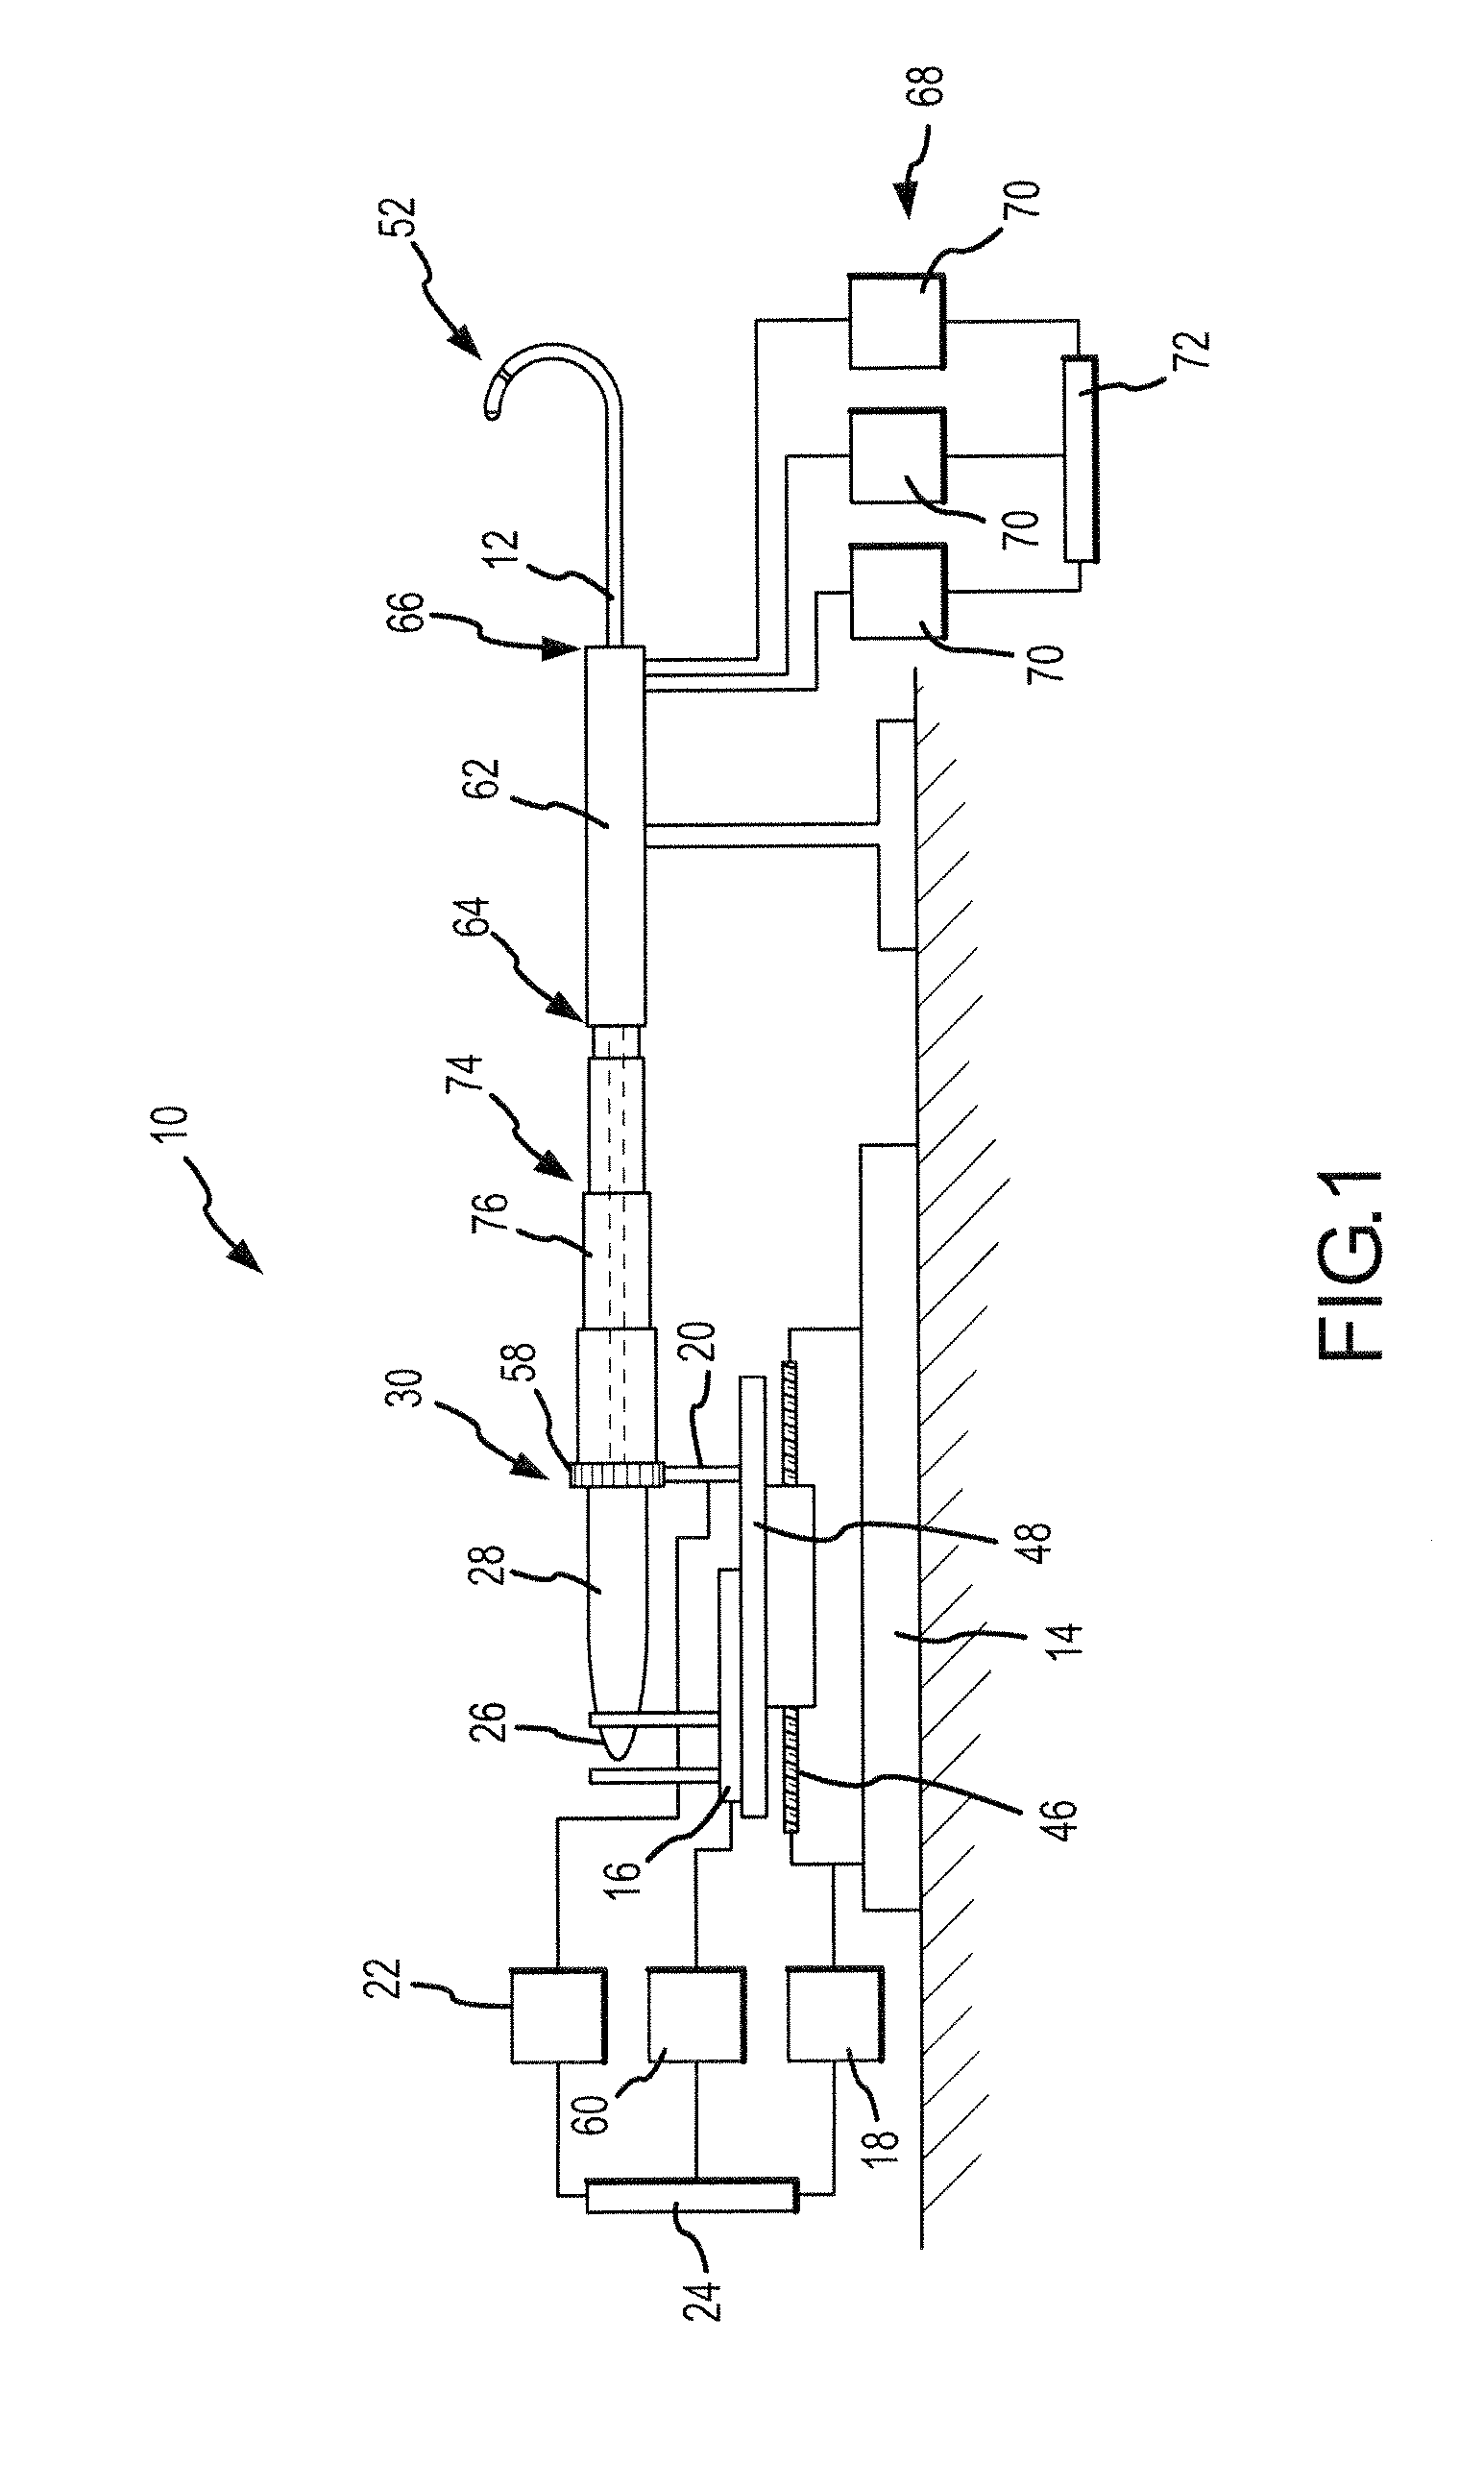 Robotically controlled catheter and method of its calibration